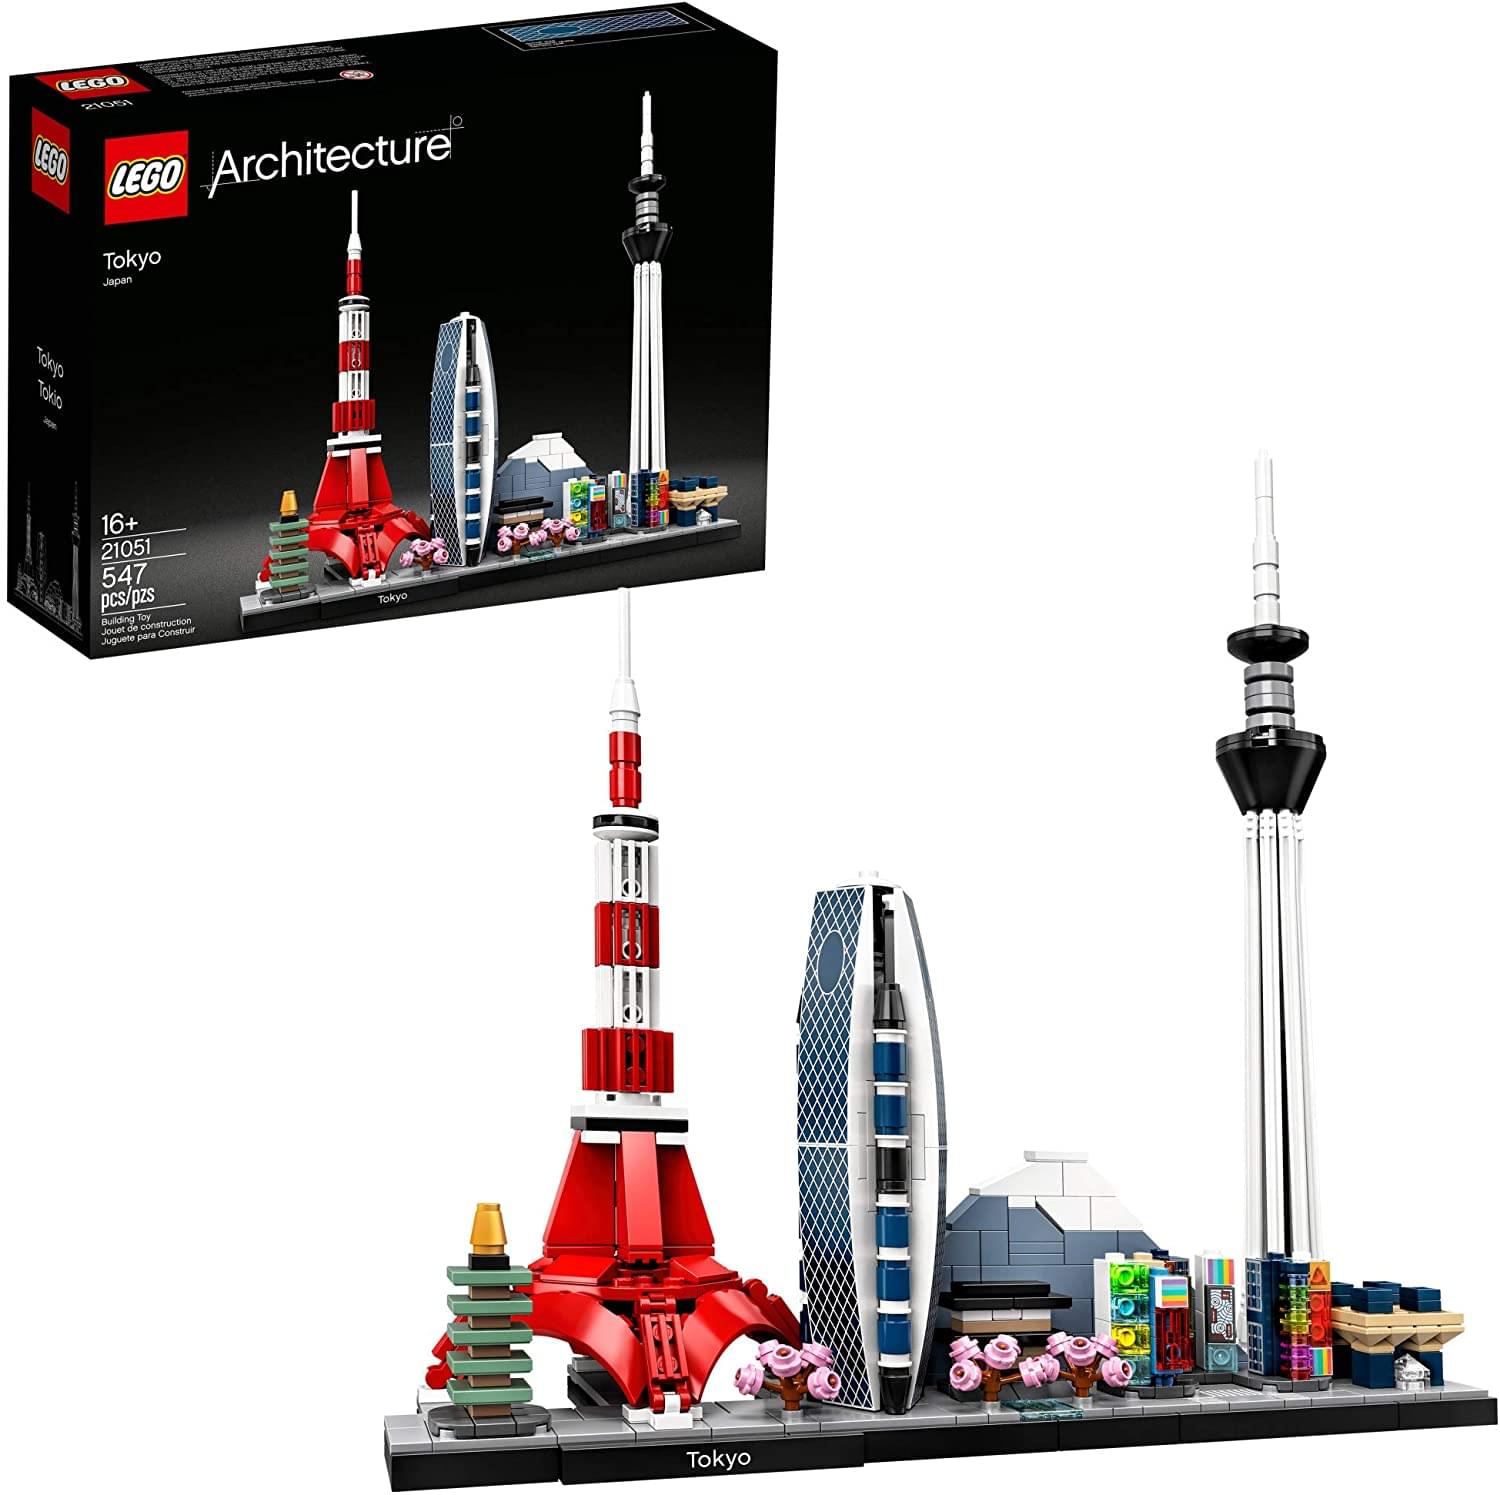 Every LEGO Architecture set retiring from 2022 to 2026